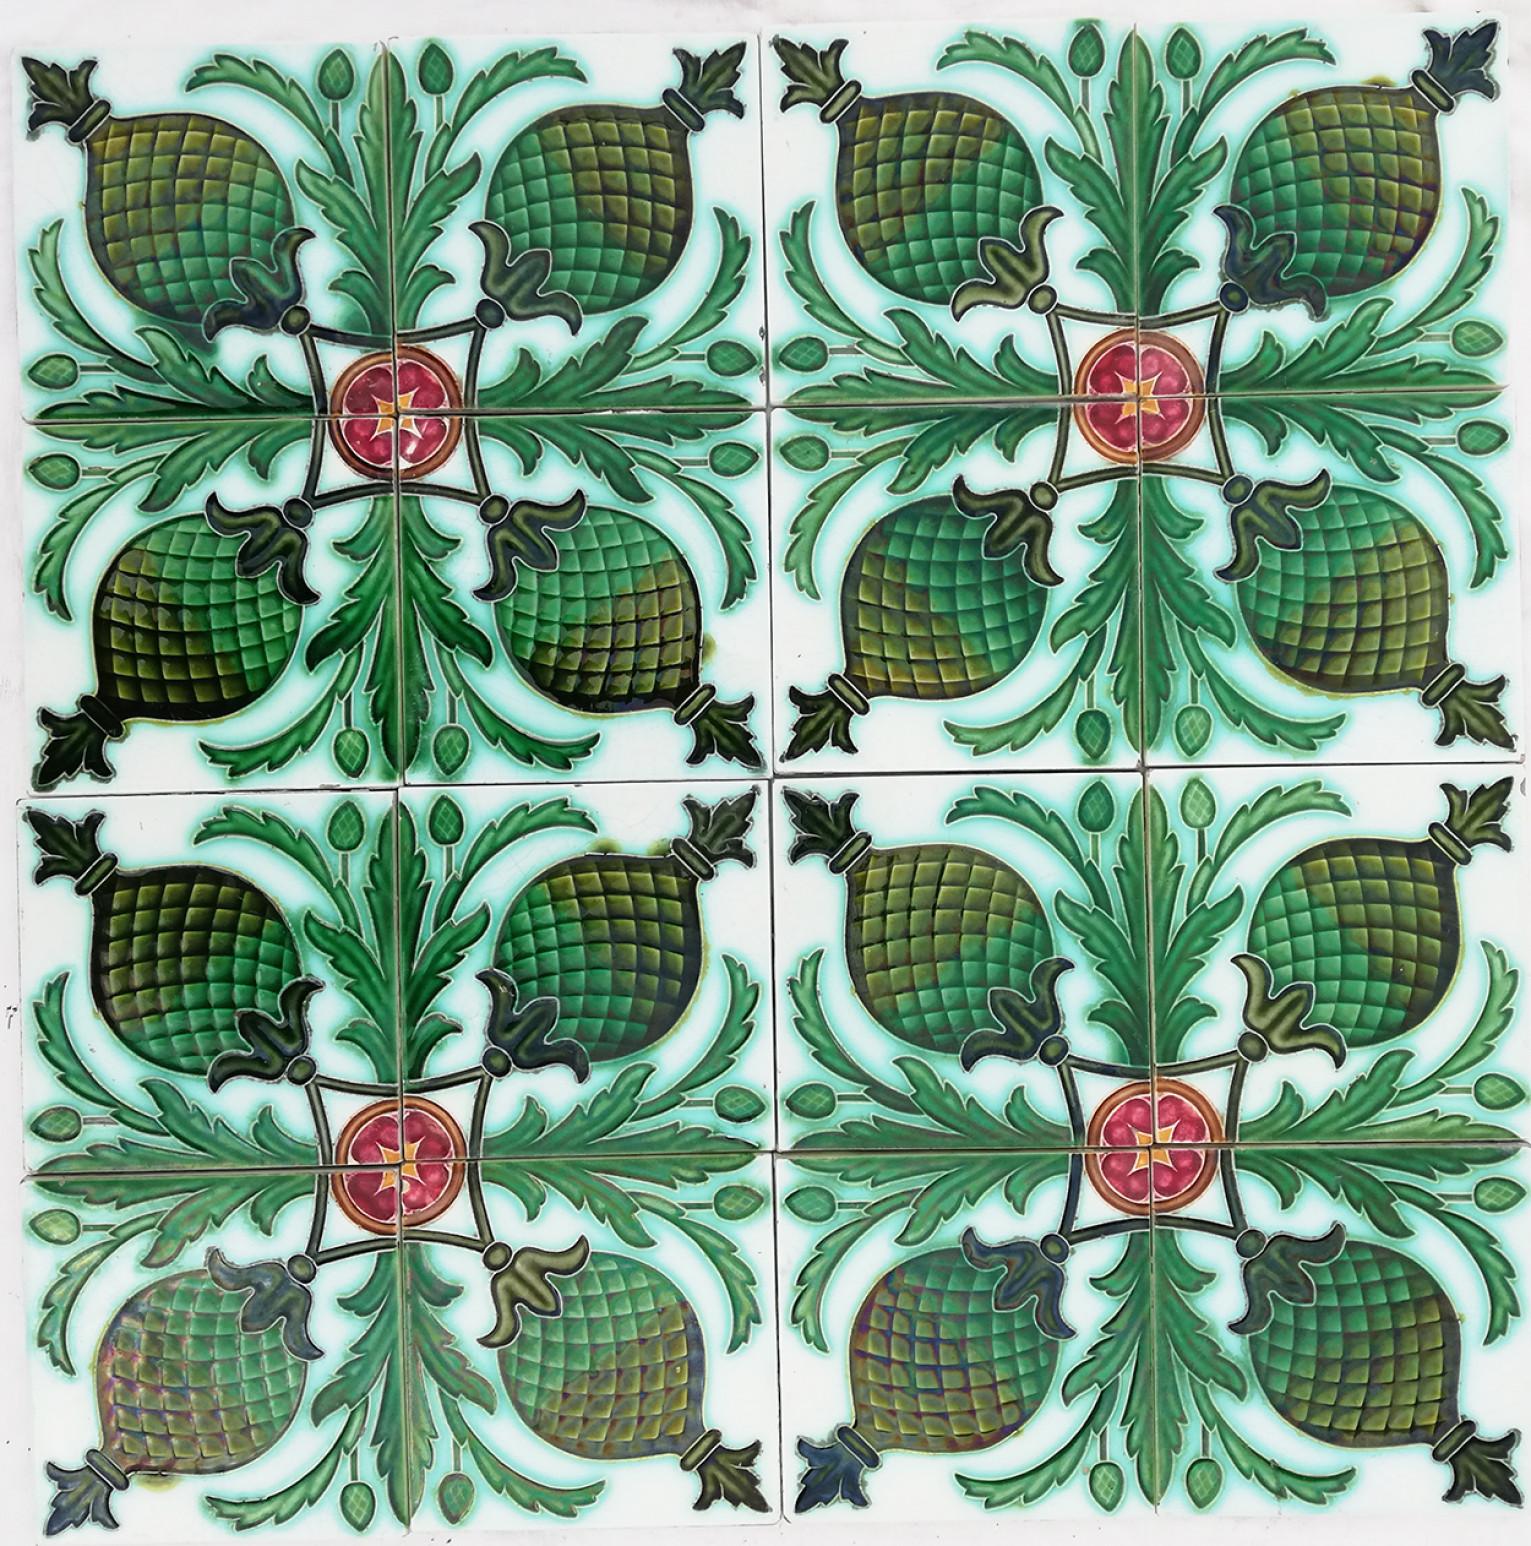 Tableau of 16 handmade antique tiles  in rich green and pink glazed colors. Manufactured around 1900 in Belgium. One tile set is divided in four squares, each symmetrically designed with a floral design. These tiles would be charming displayed on